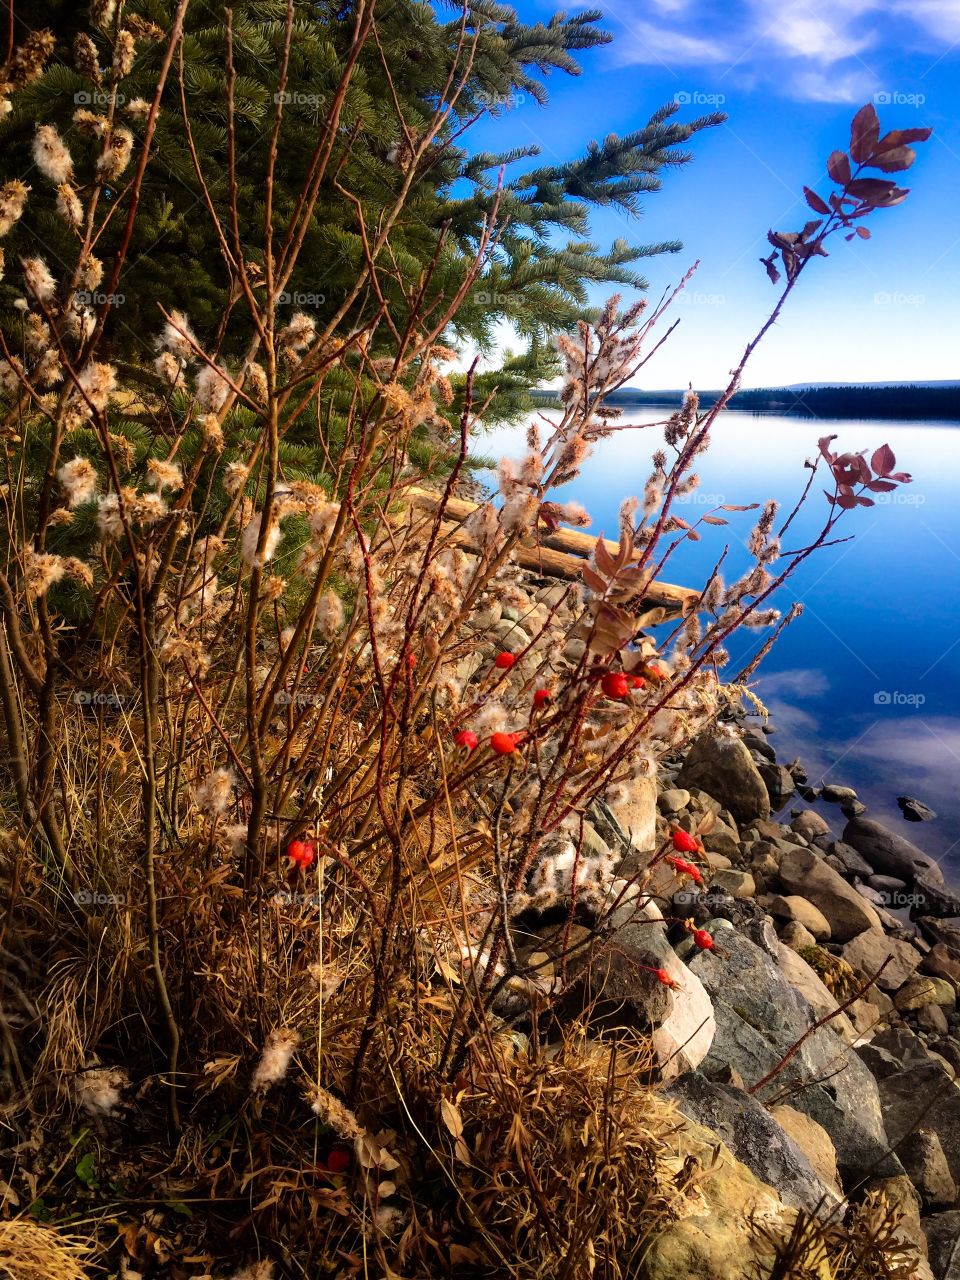 Autumn last colors pushing through along the lakeshore. Wild rose-hips display their bright red glow amongst the dry dead foliage.  